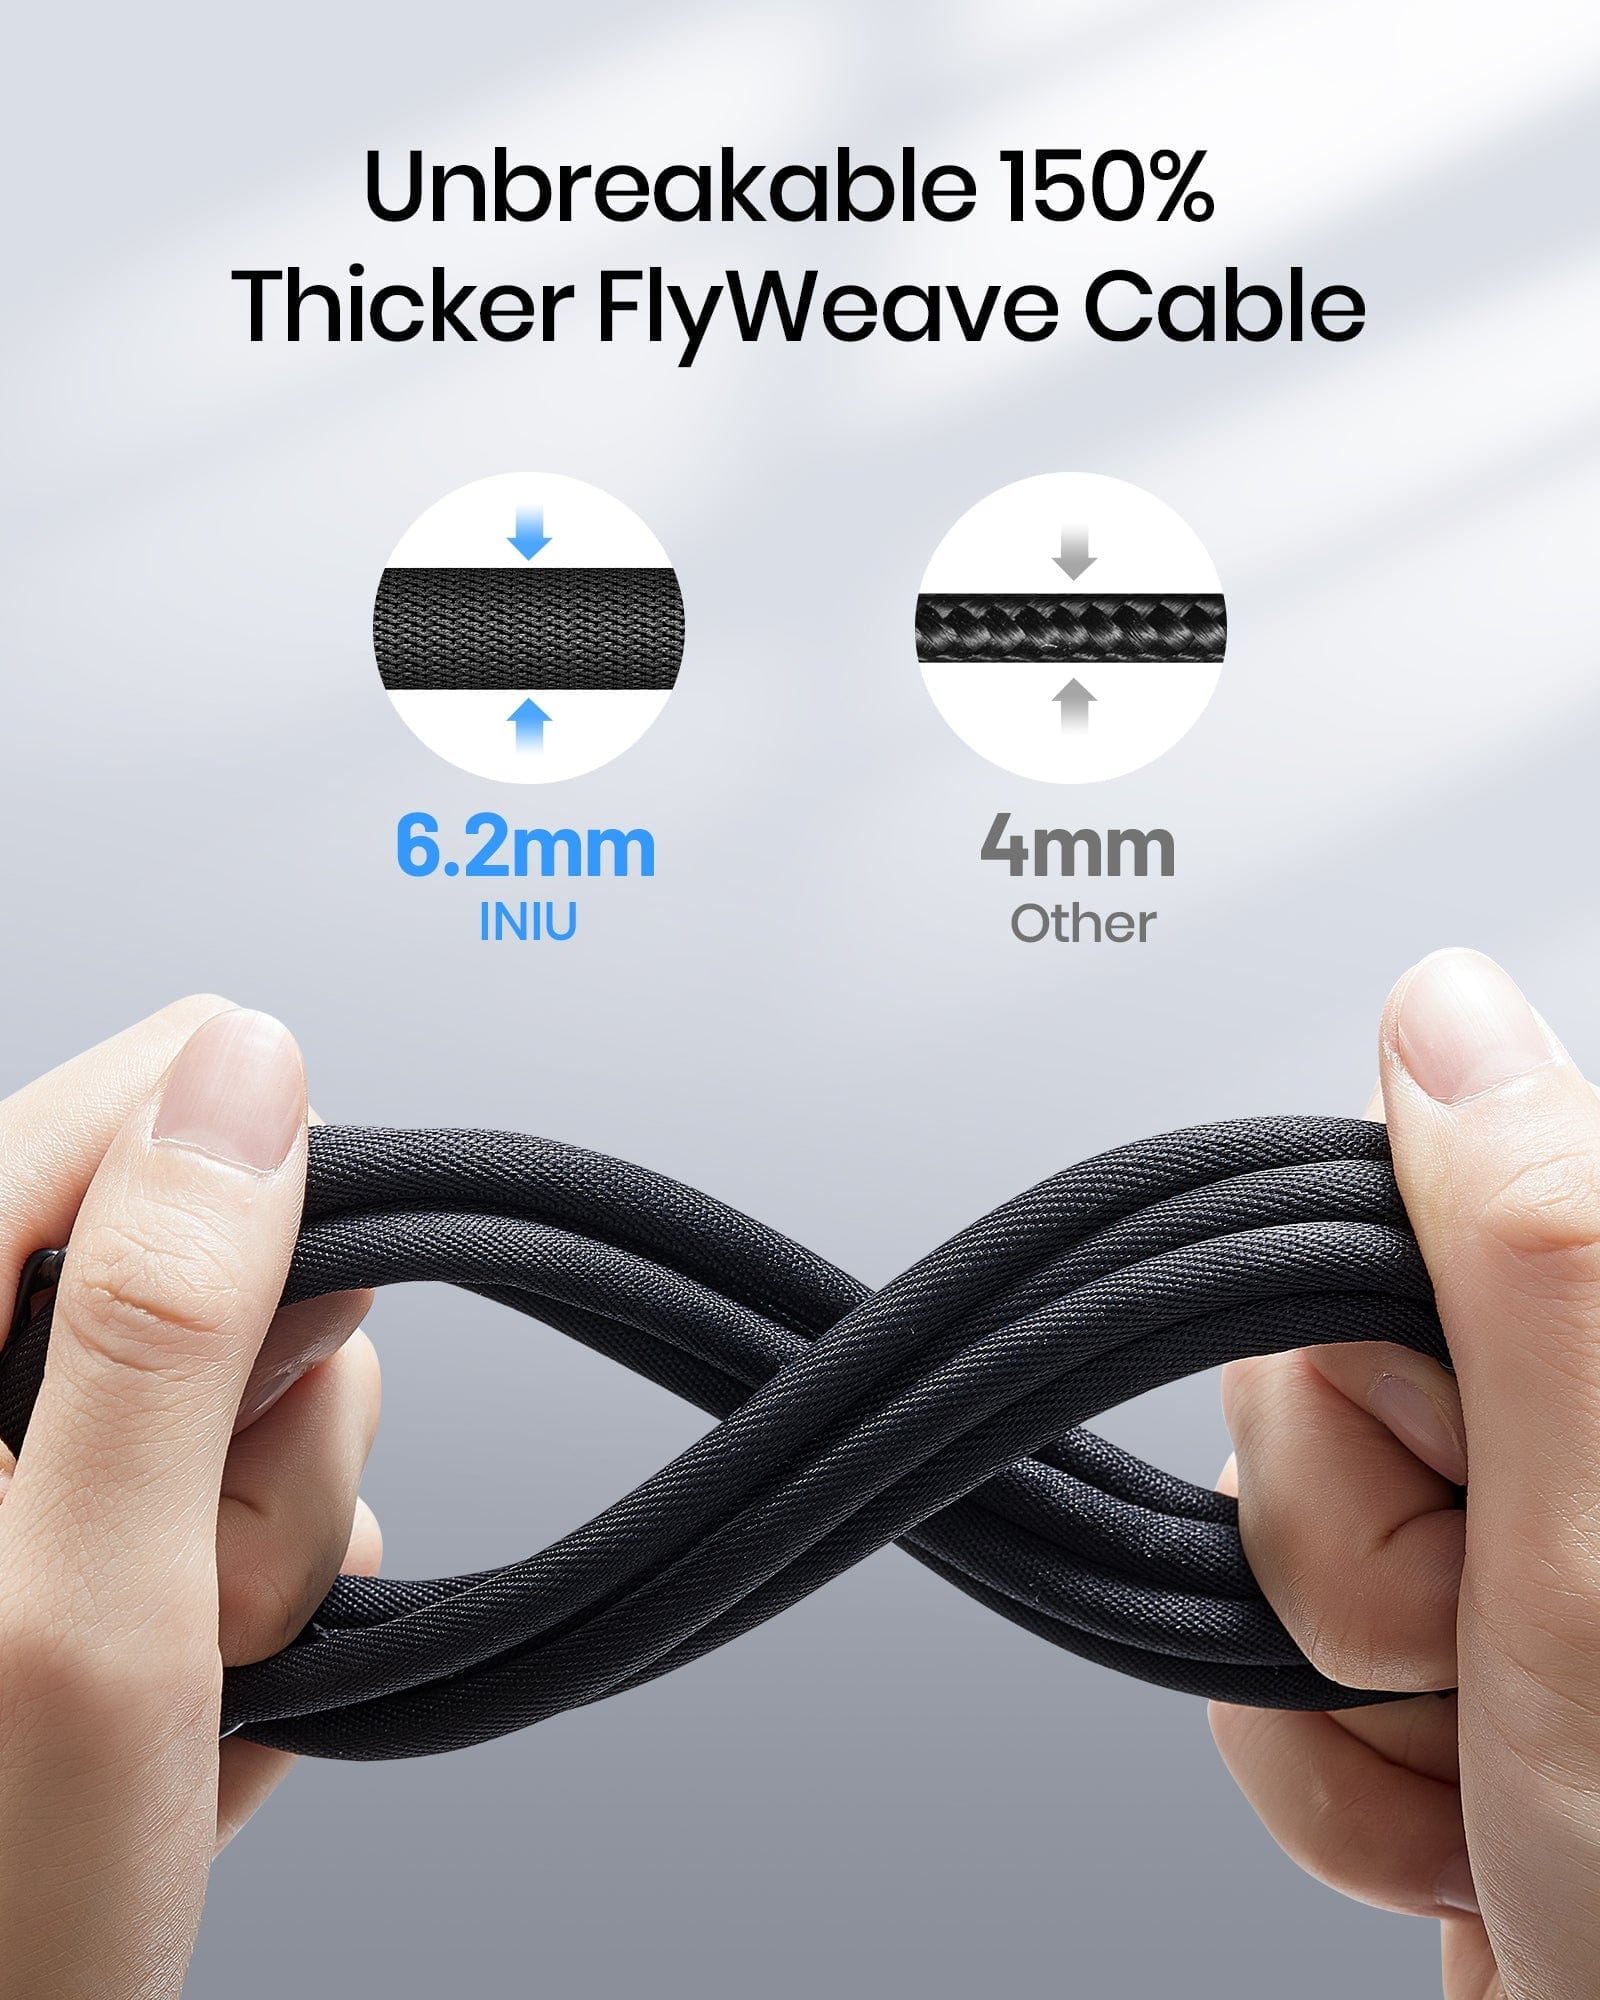 Unbreakable 150% Thicker FlyWeave Cable